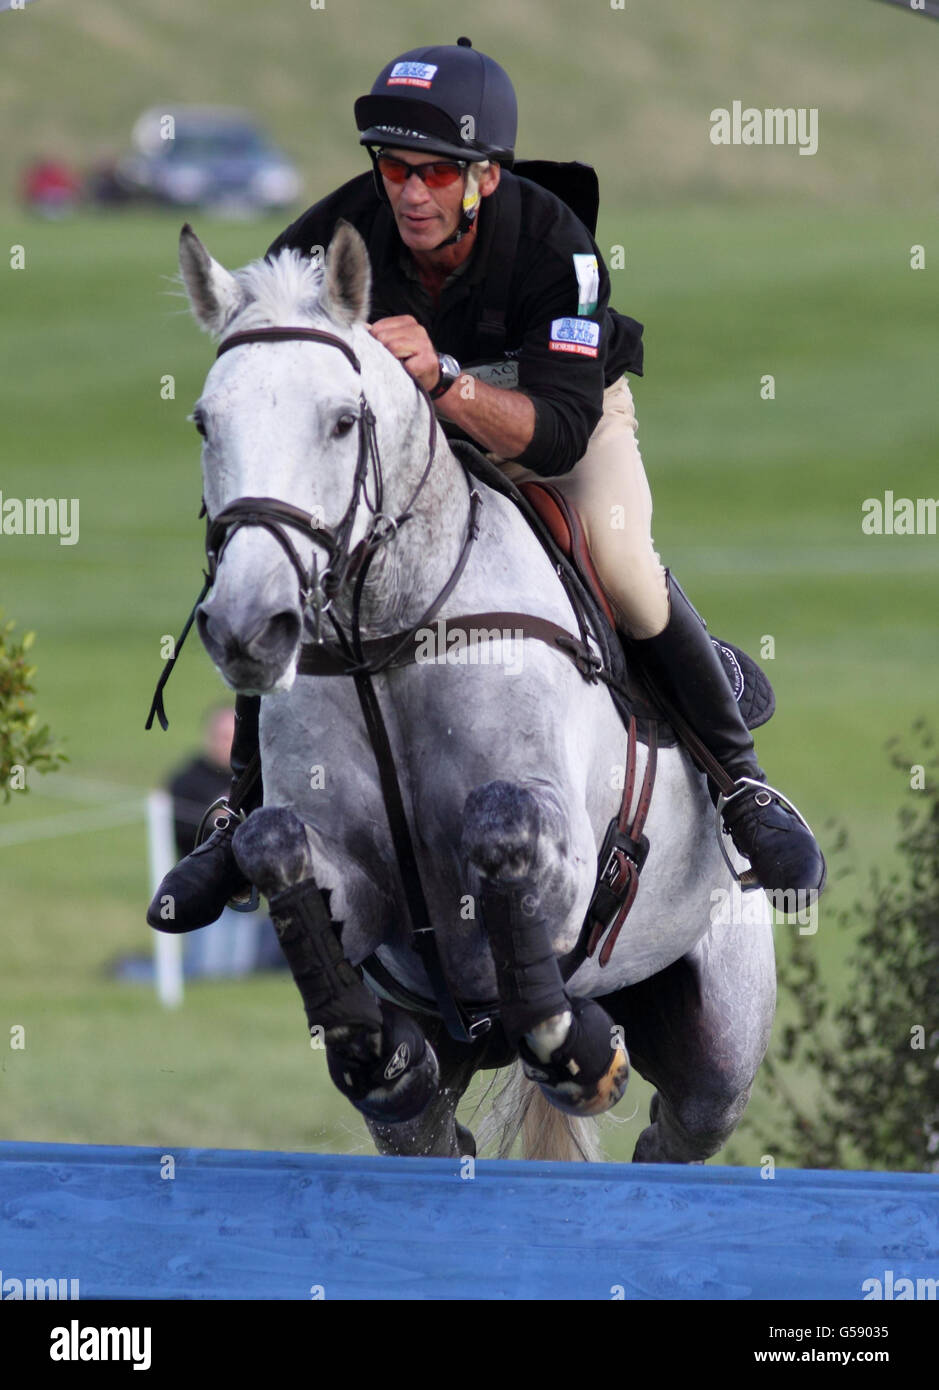 New Zealand's Andrew Nicholson rides Avebury in the St James's Place Barbury International Horse Trials during day three of the Barbury International Horse Trials at Barbury Castle Estate, Wiltshire. Stock Photo